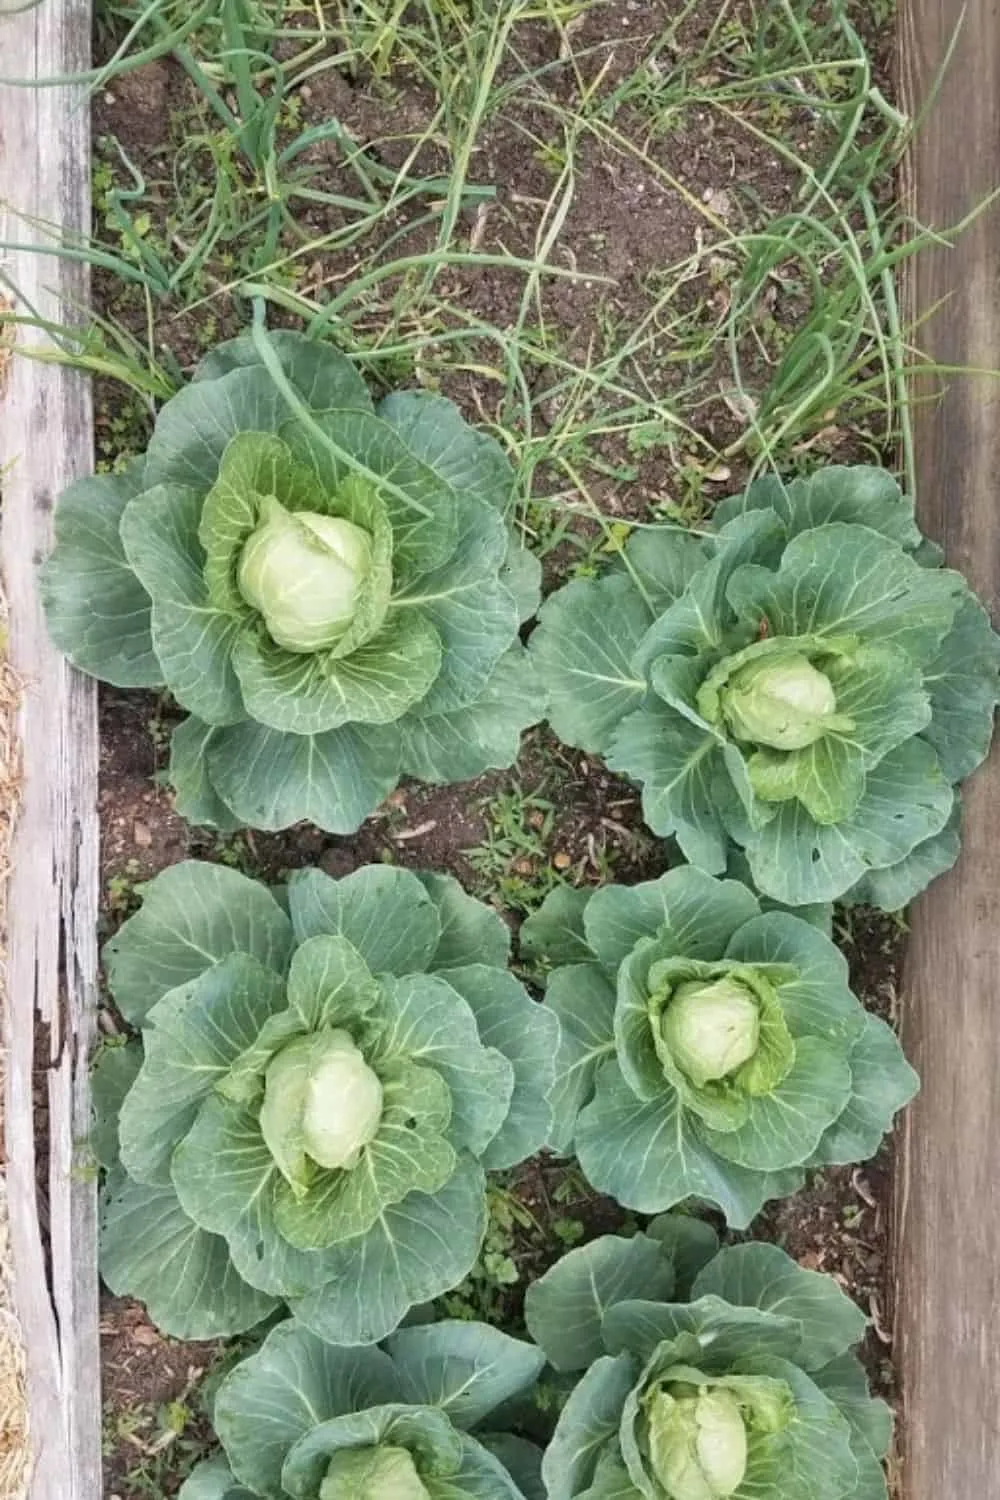 Cabbage and onions growing in a raised bed